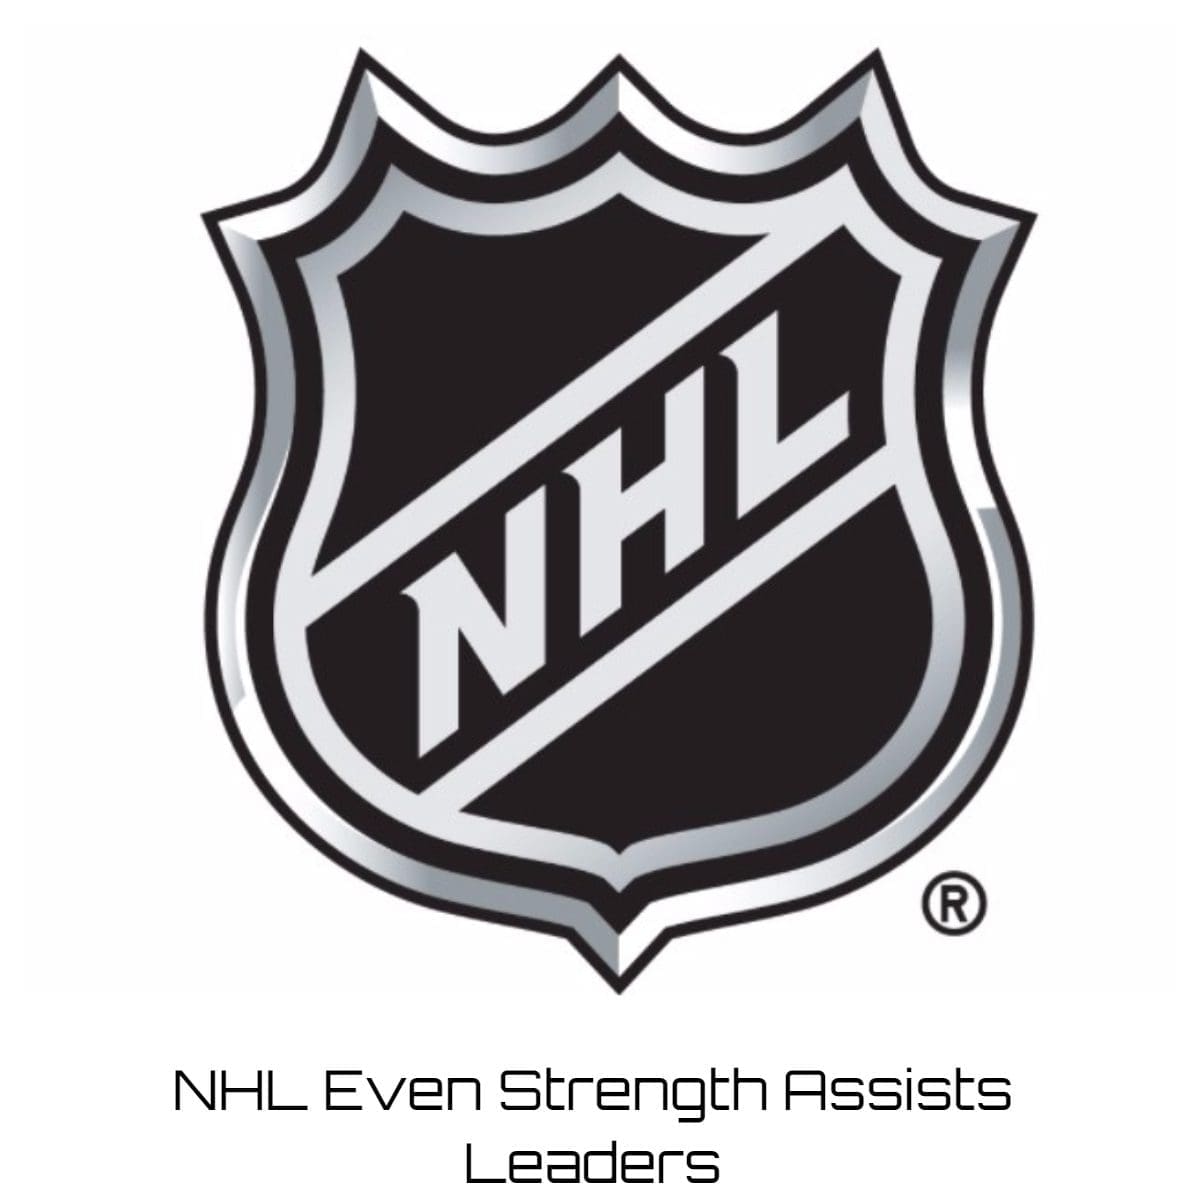 NHL Even Strength Assists Leaders